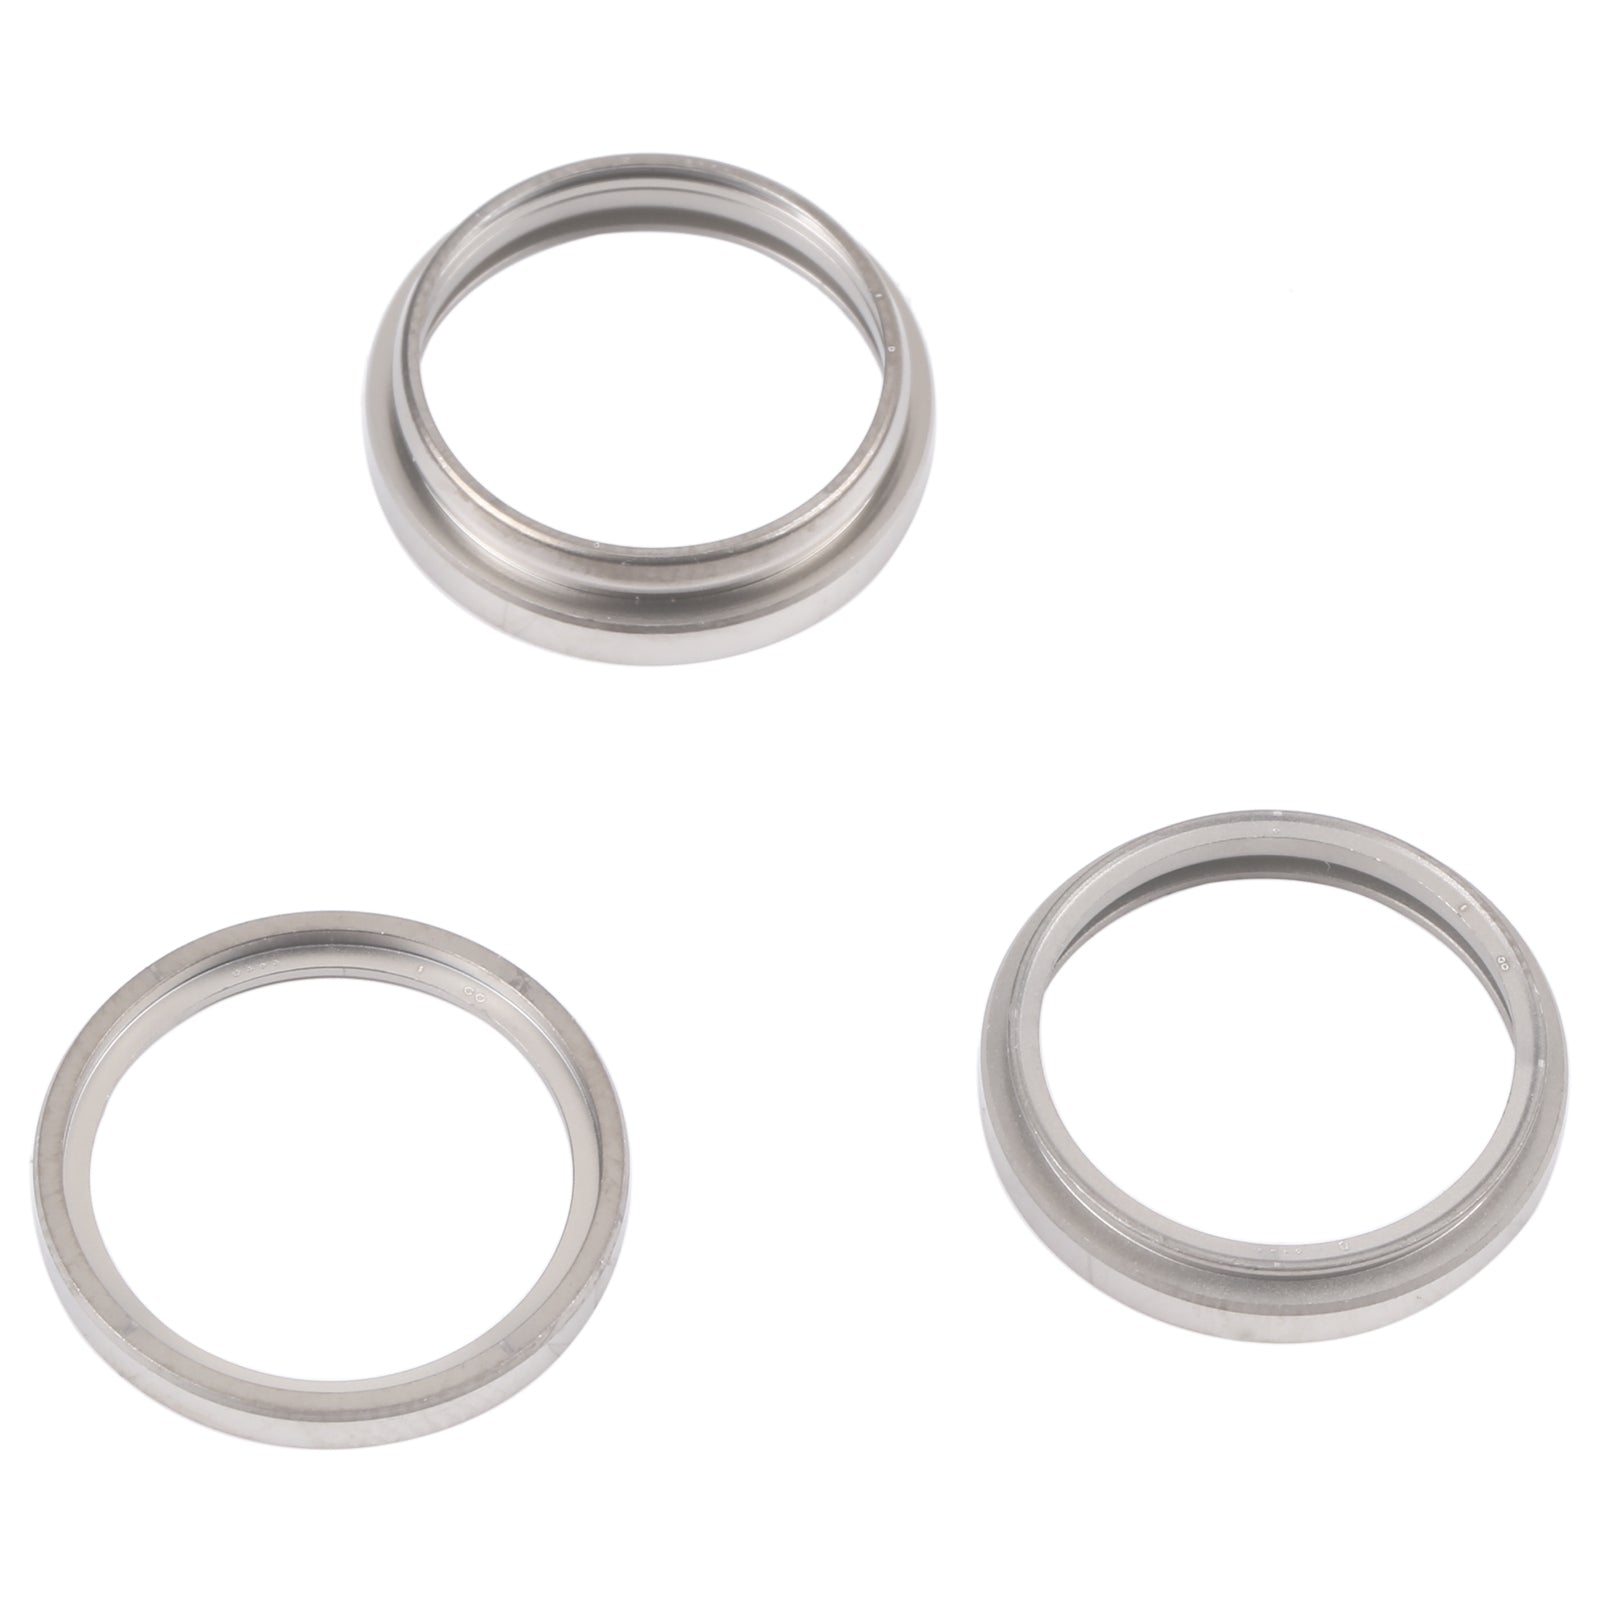 Rings for Rear Camera Lens Apple iPhone 14 Pro Max Silver